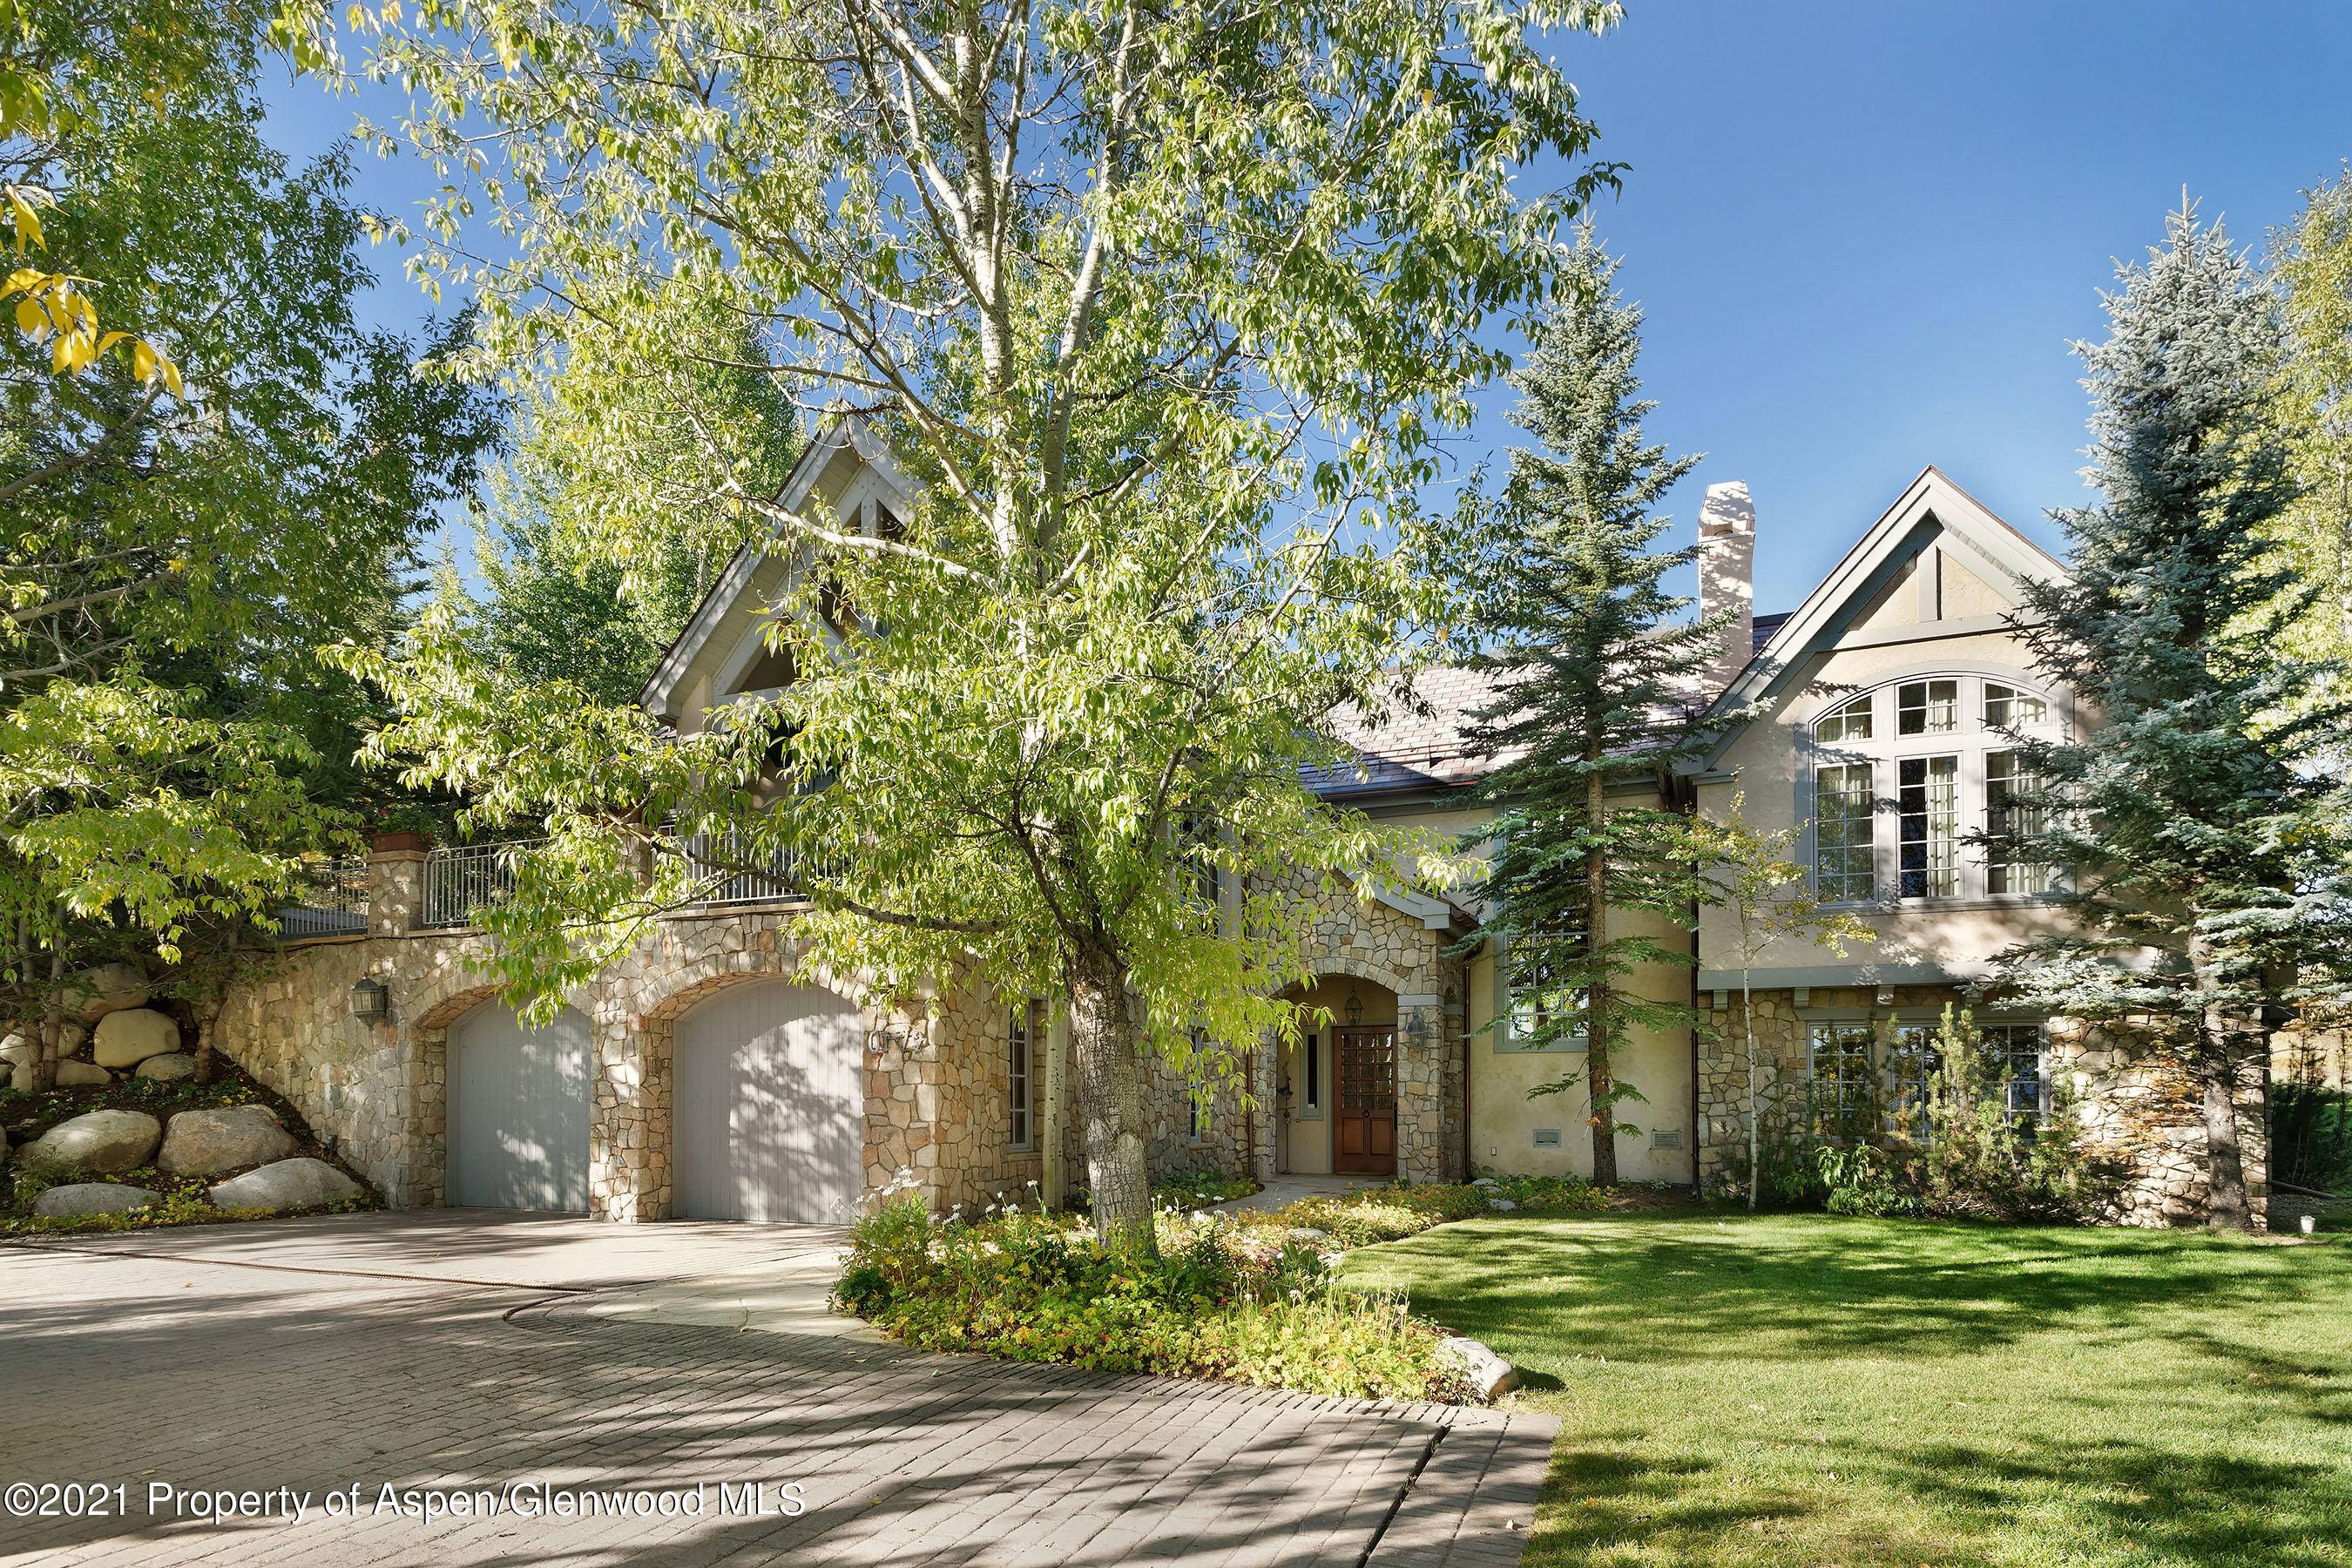 This gorgeous mountain home is situated in one of the finest neighborhoods that Snowmass Village has to offer.